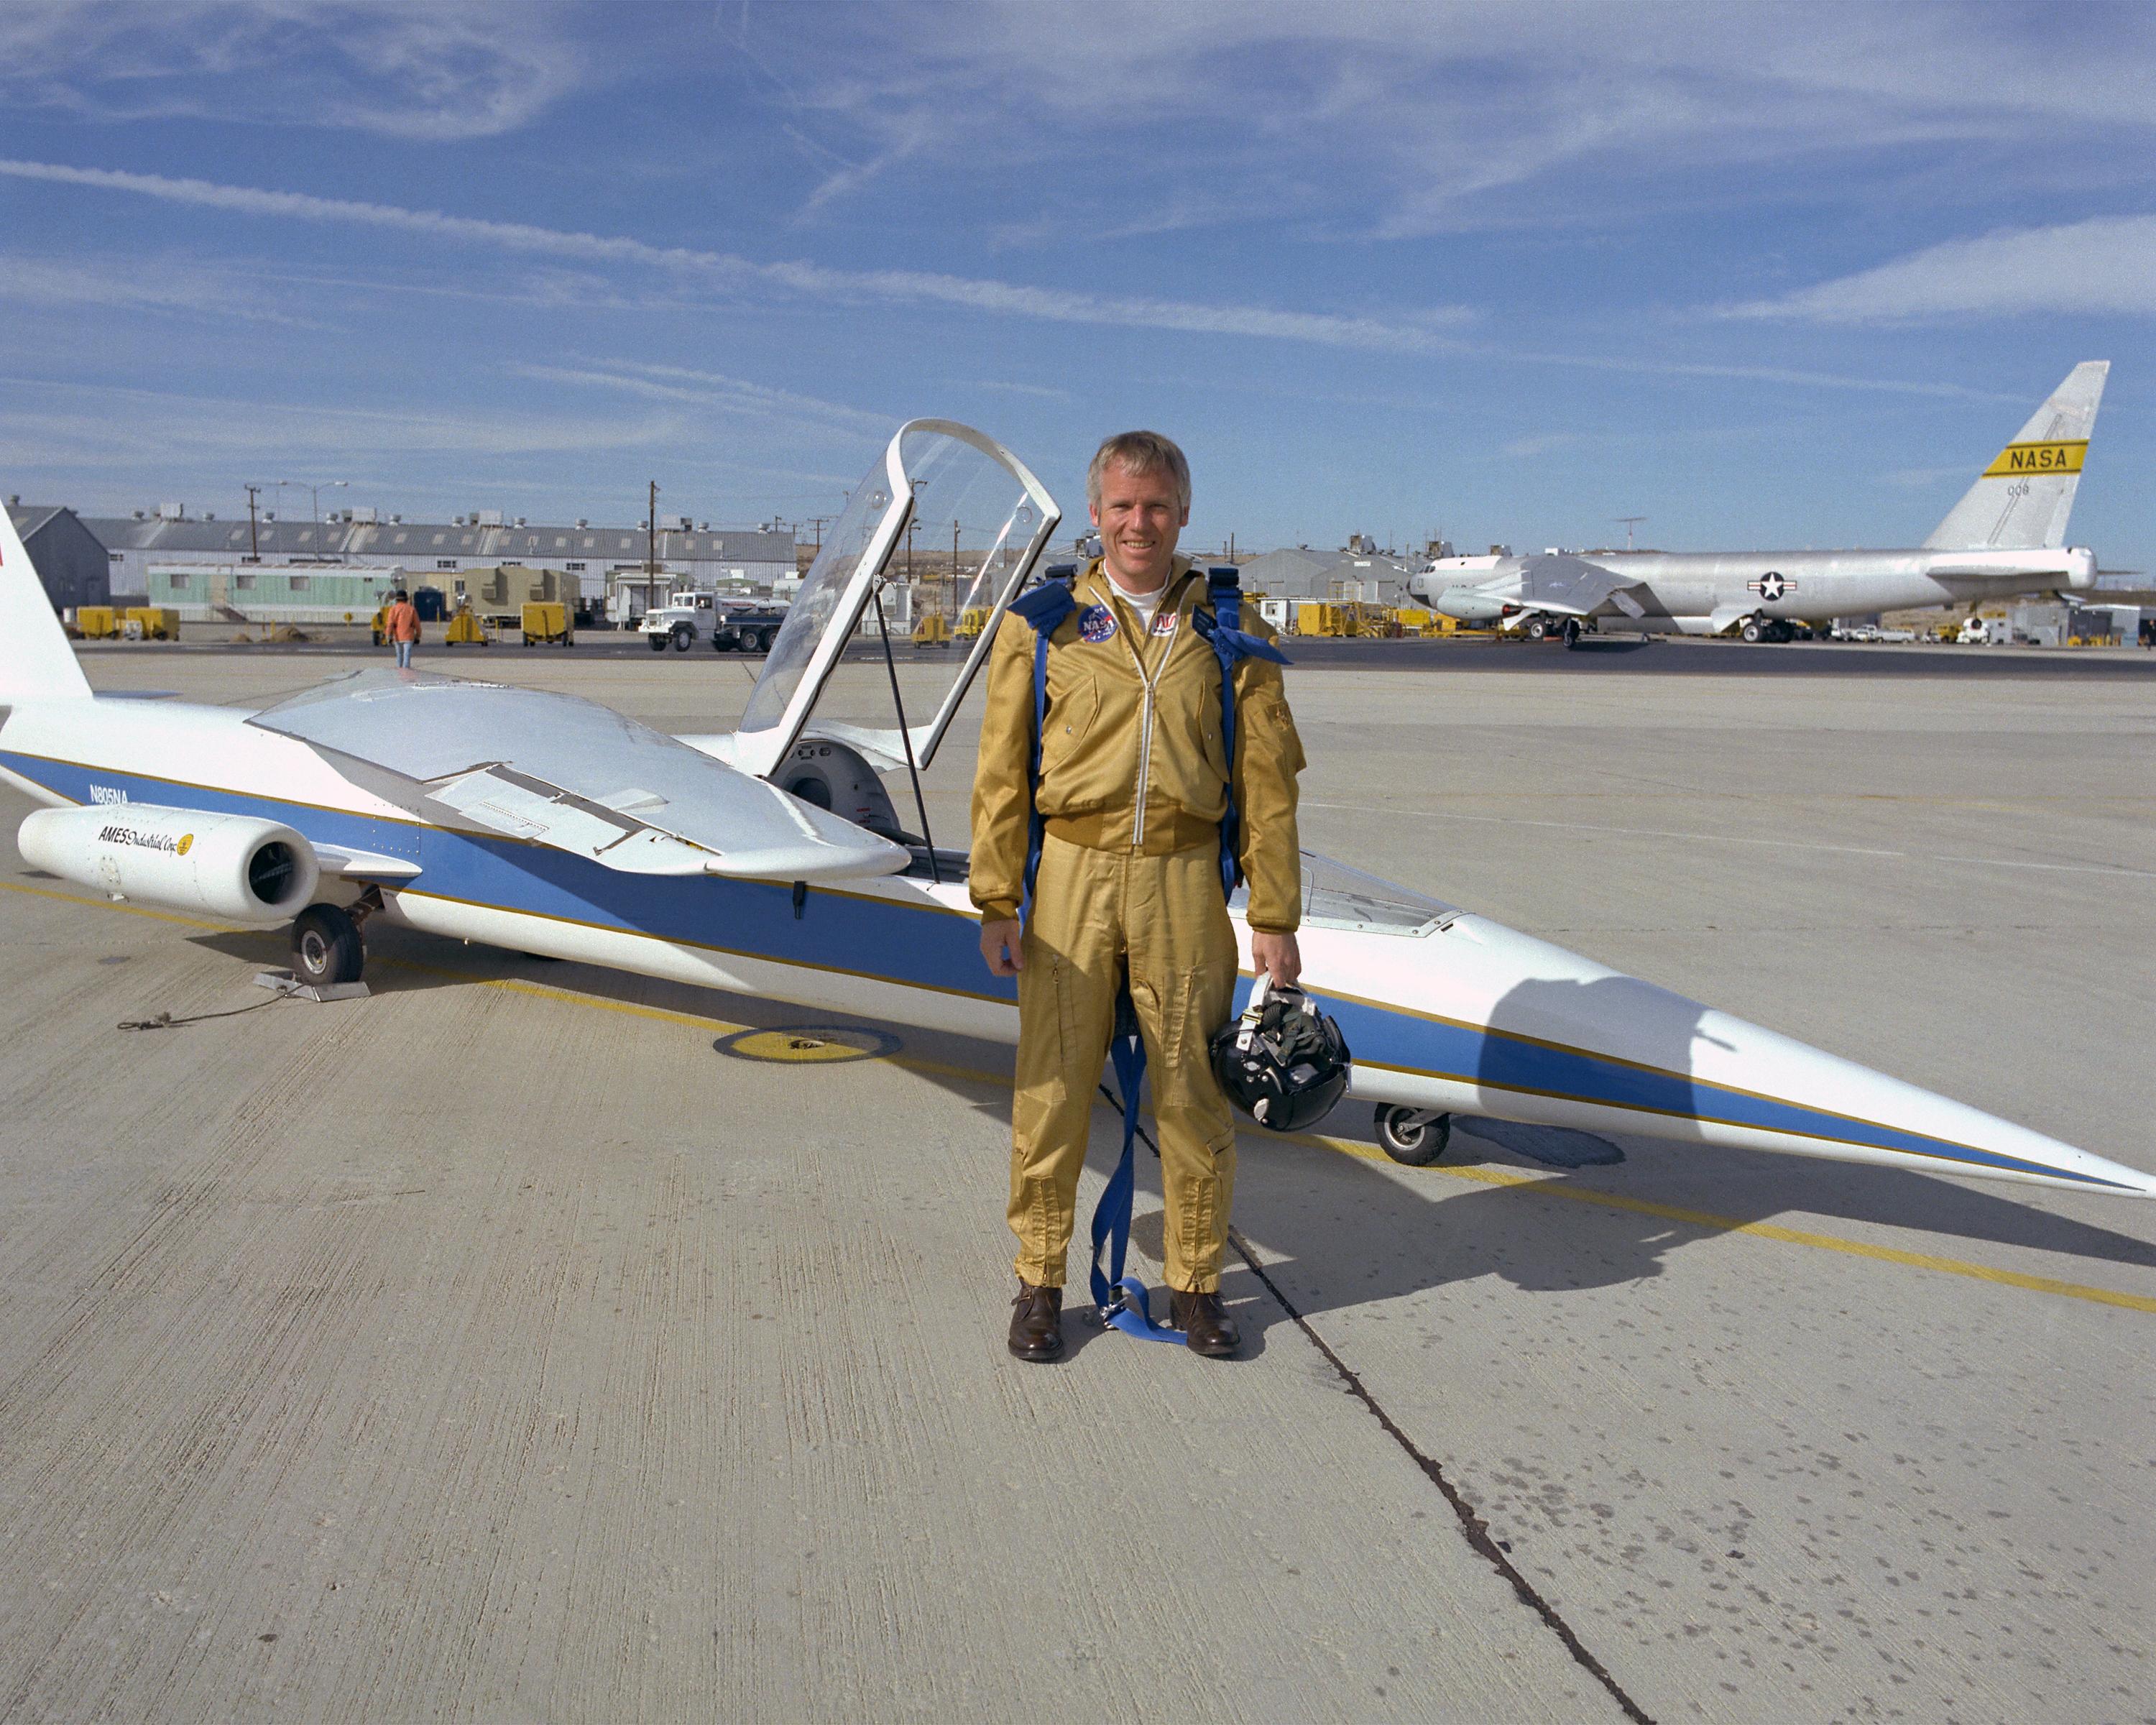 Pilot, Richard E. Gray in front of an oblique wing aircraft parked on the tarmac.